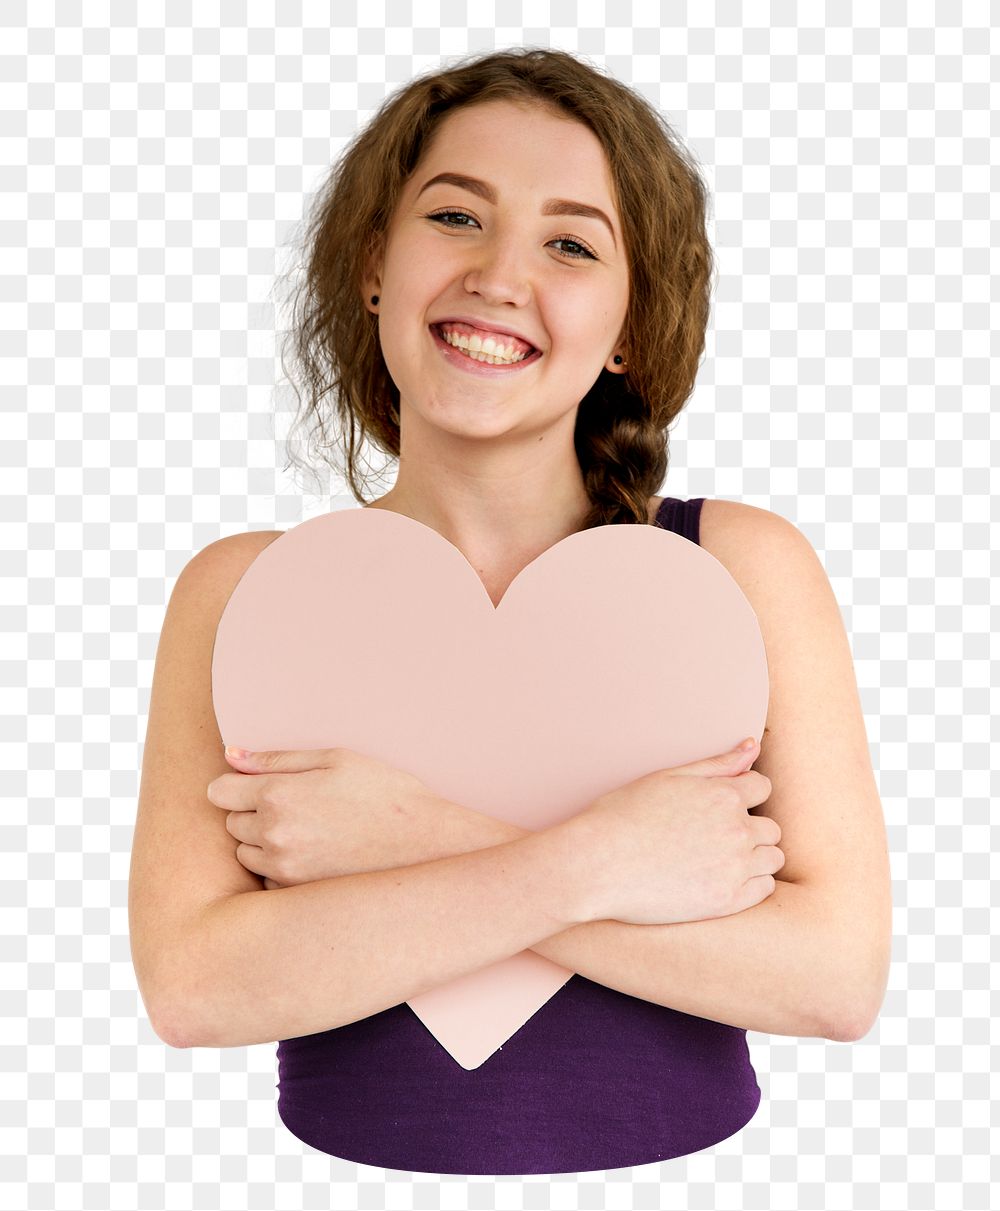 Young lady png element, transparent background